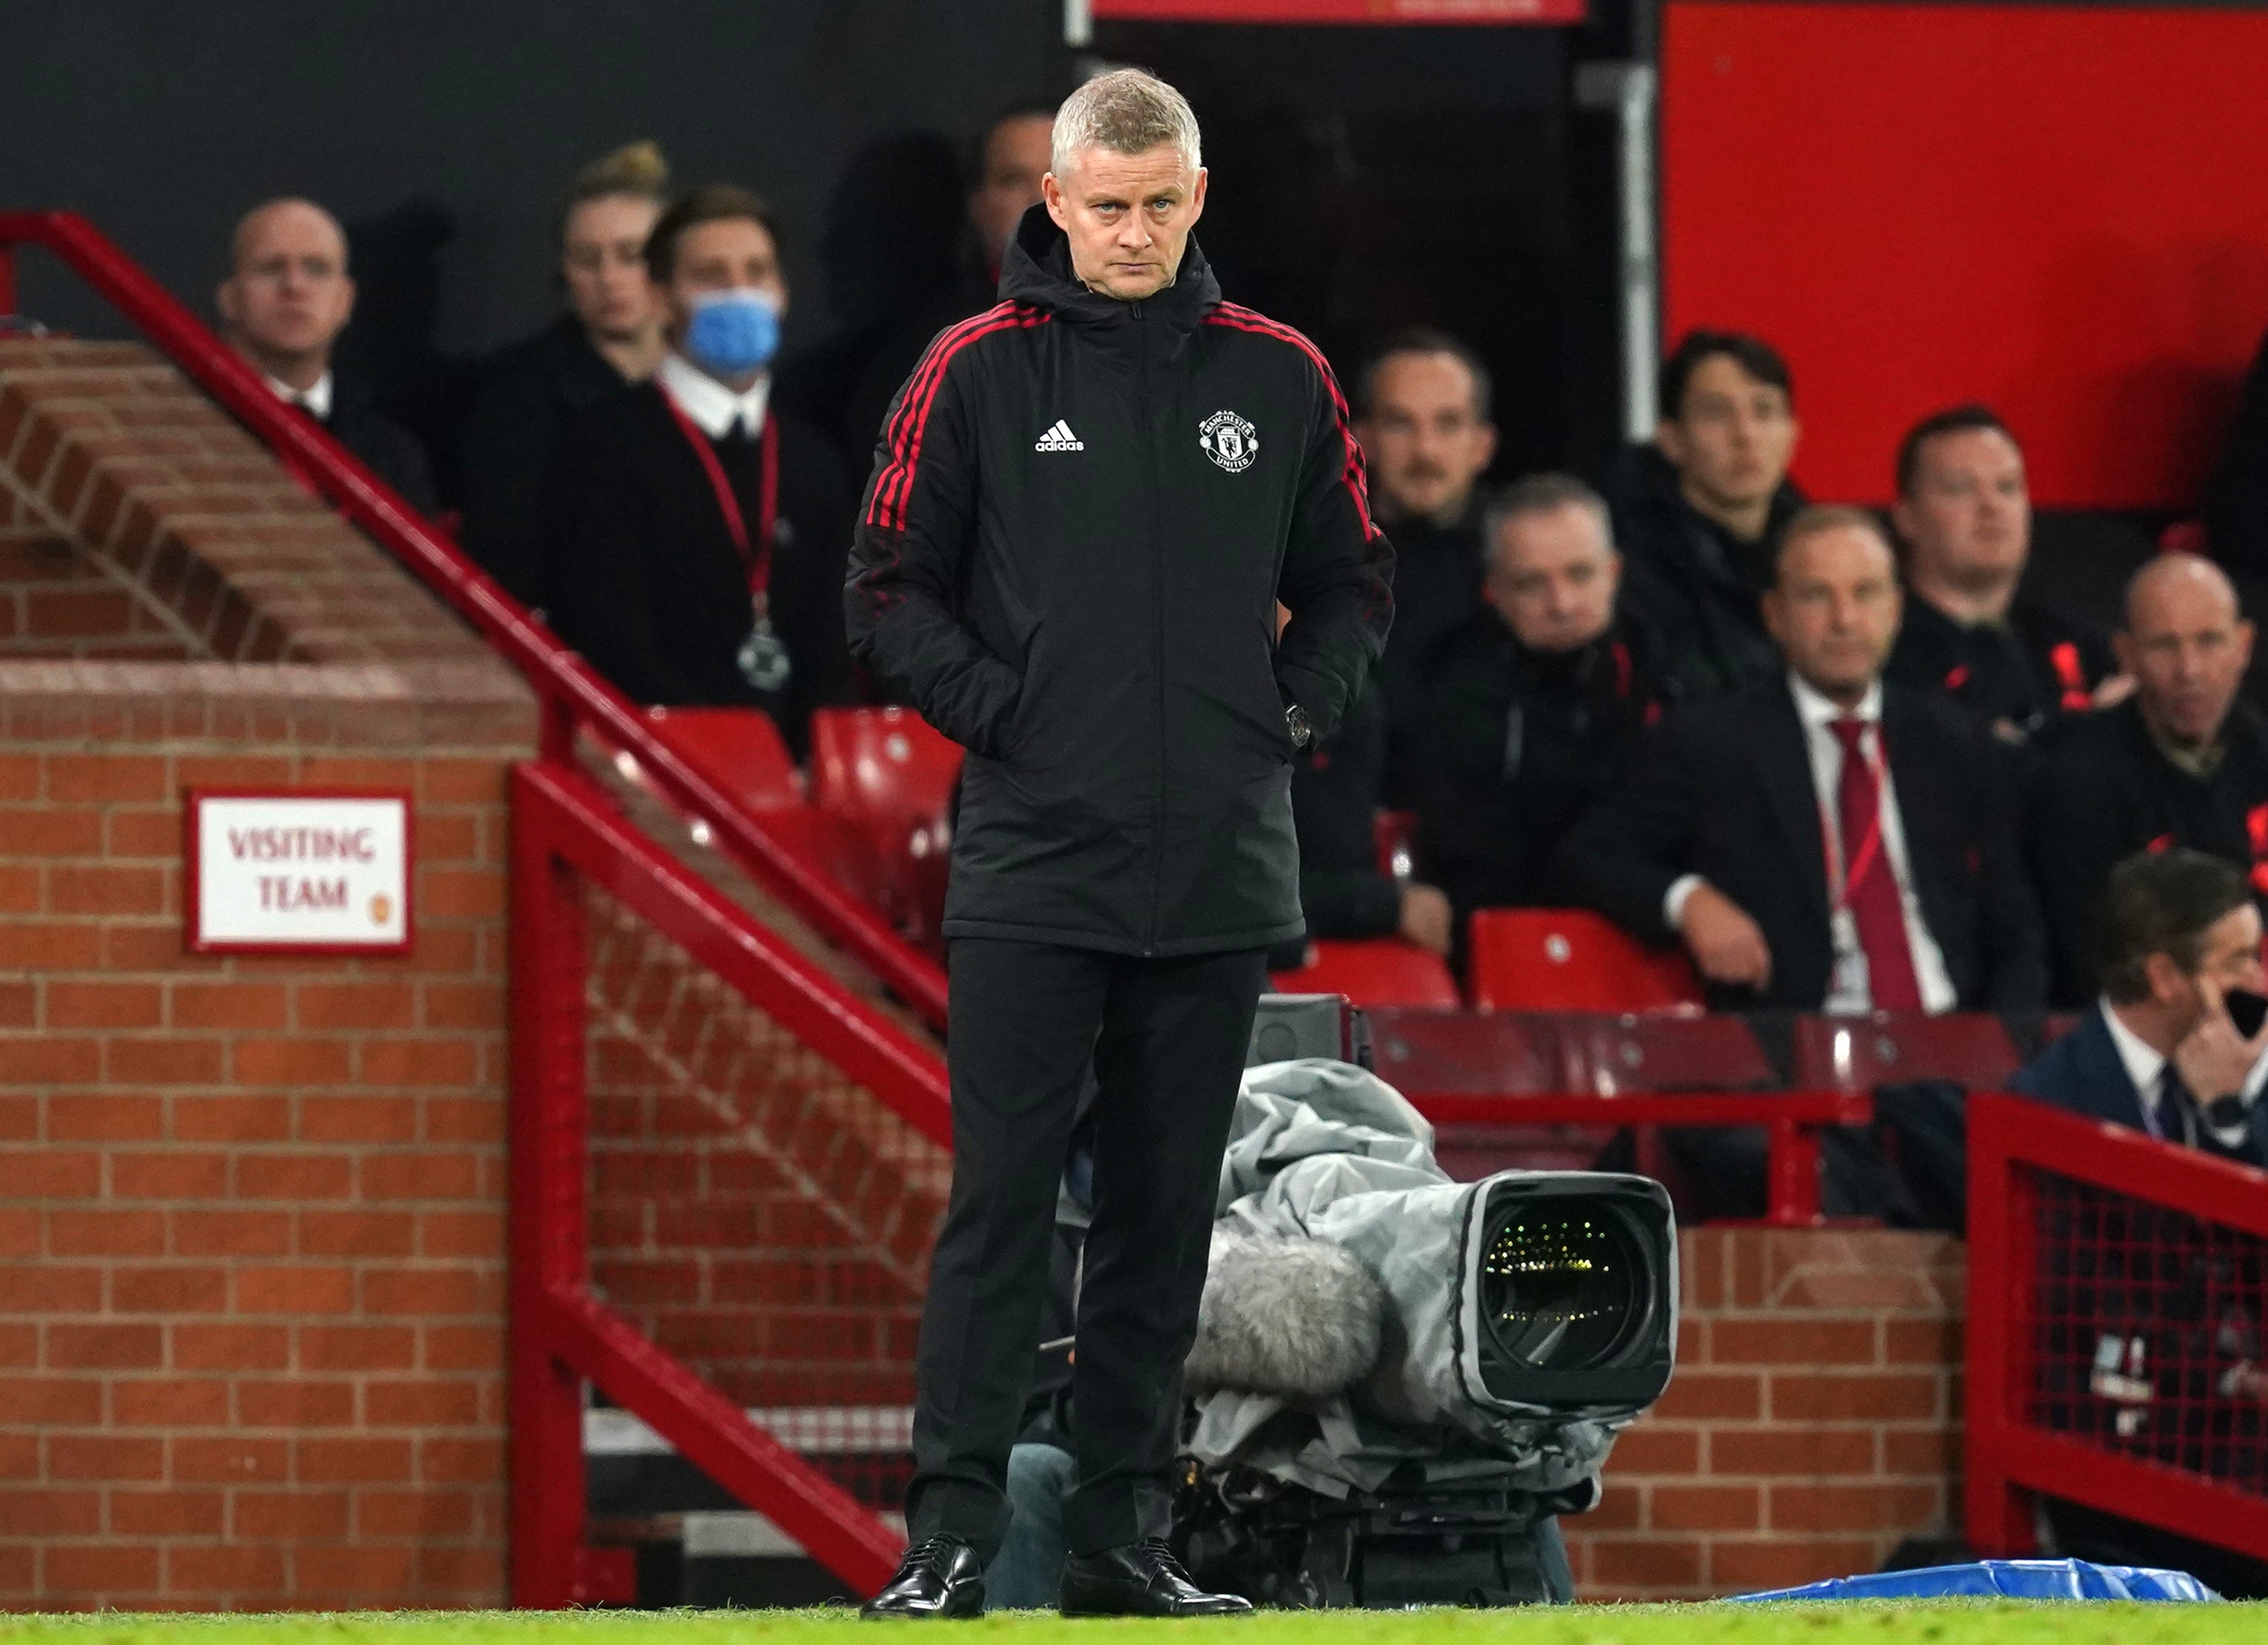 Solskjaer saw his side routed by their Merseyside rivals